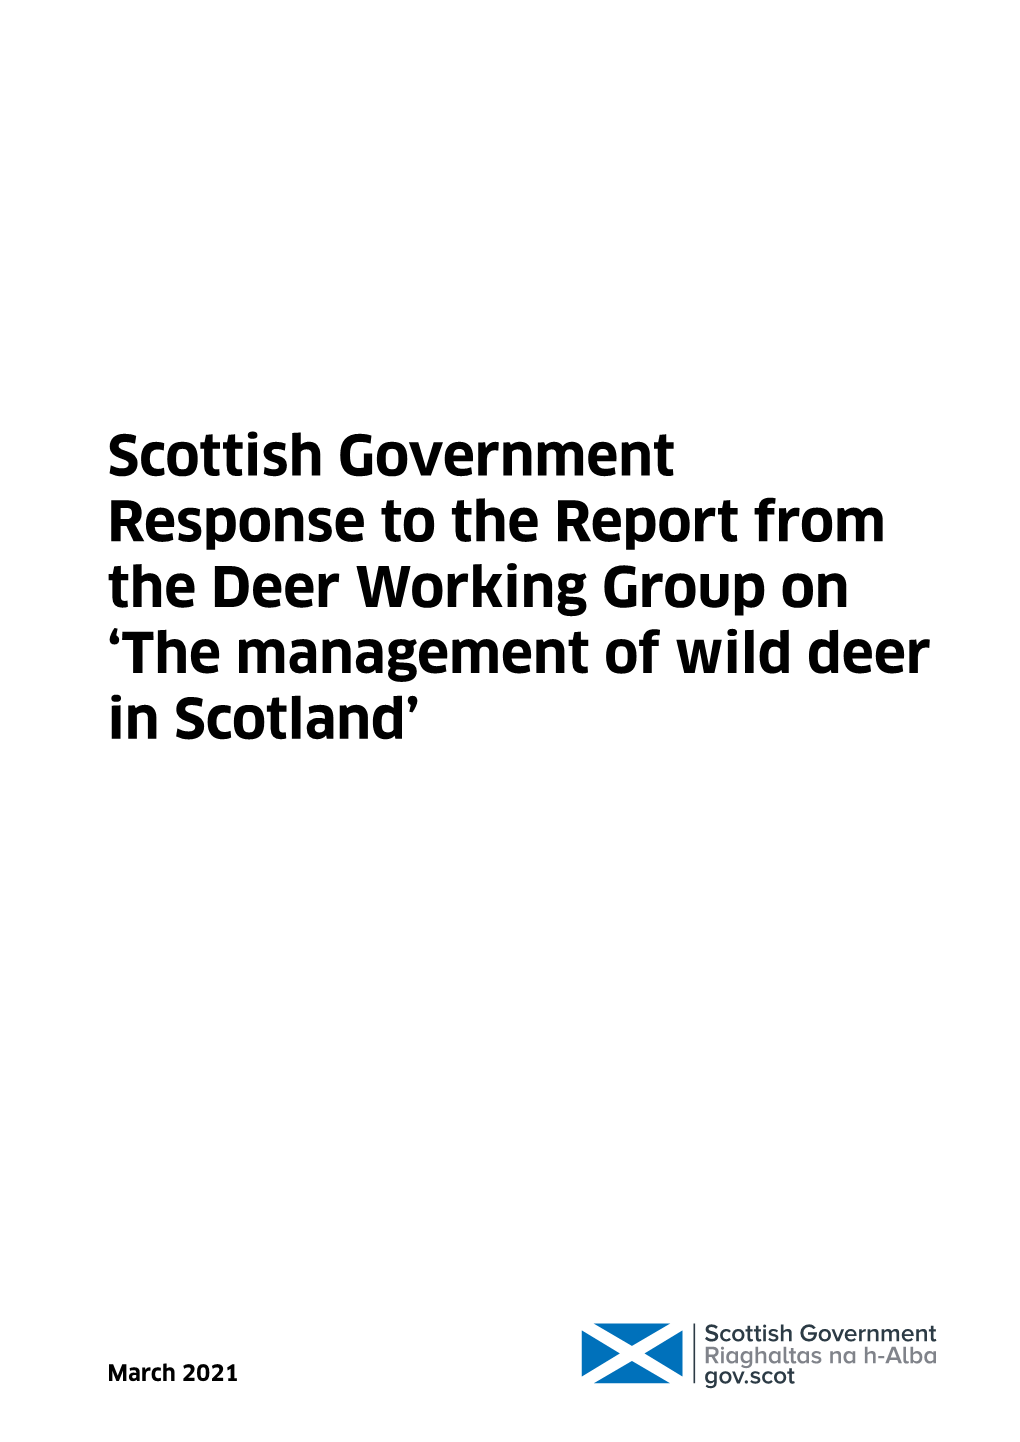 Scottish Government Response to the Report from the Deer Working Group on 'The Management of Wild Deer in Scotland'